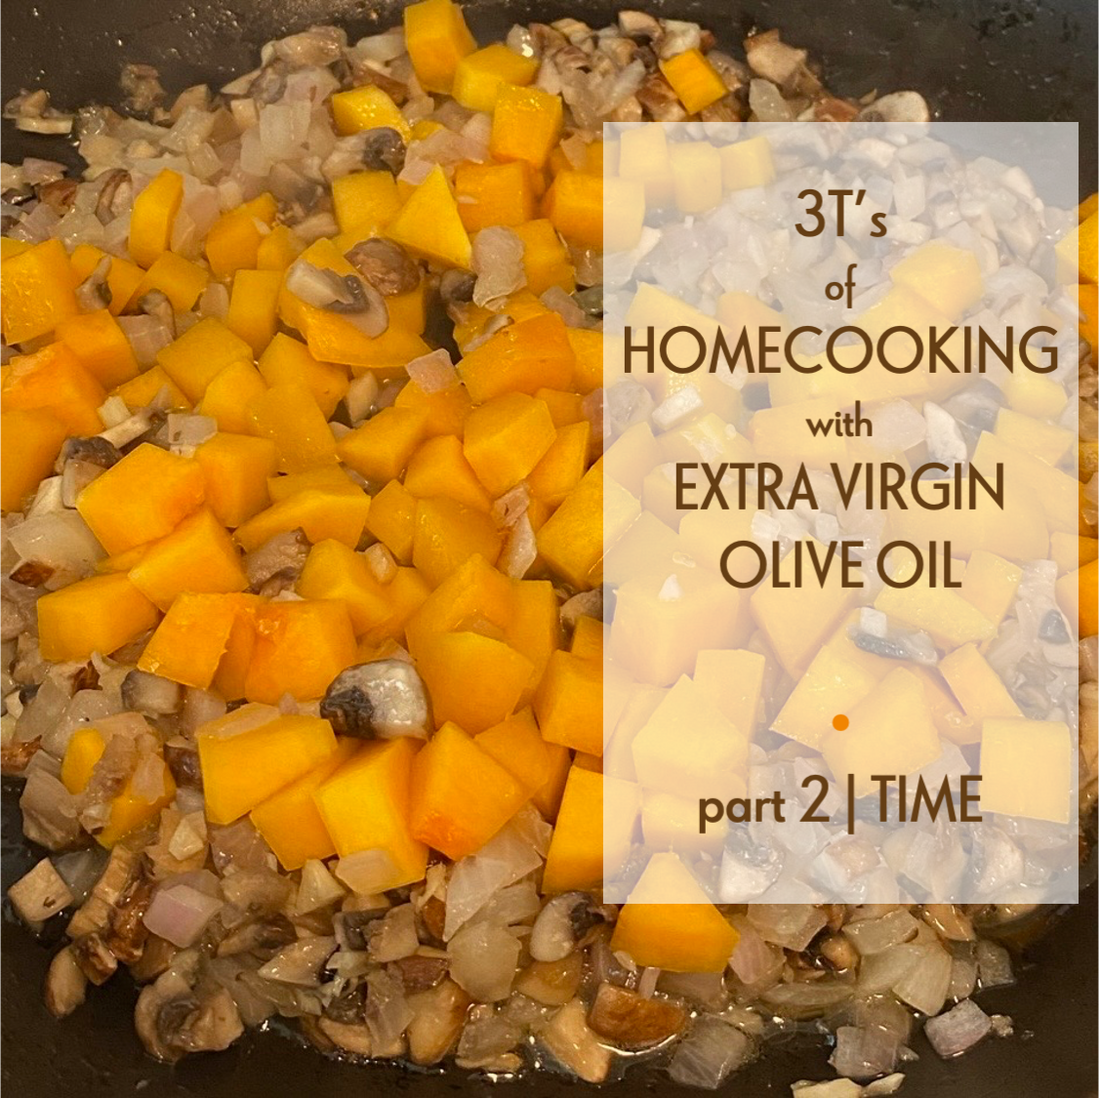 Part 2: 3T’s of Home-cooking with Extra Virgin Olive Oil (Time)